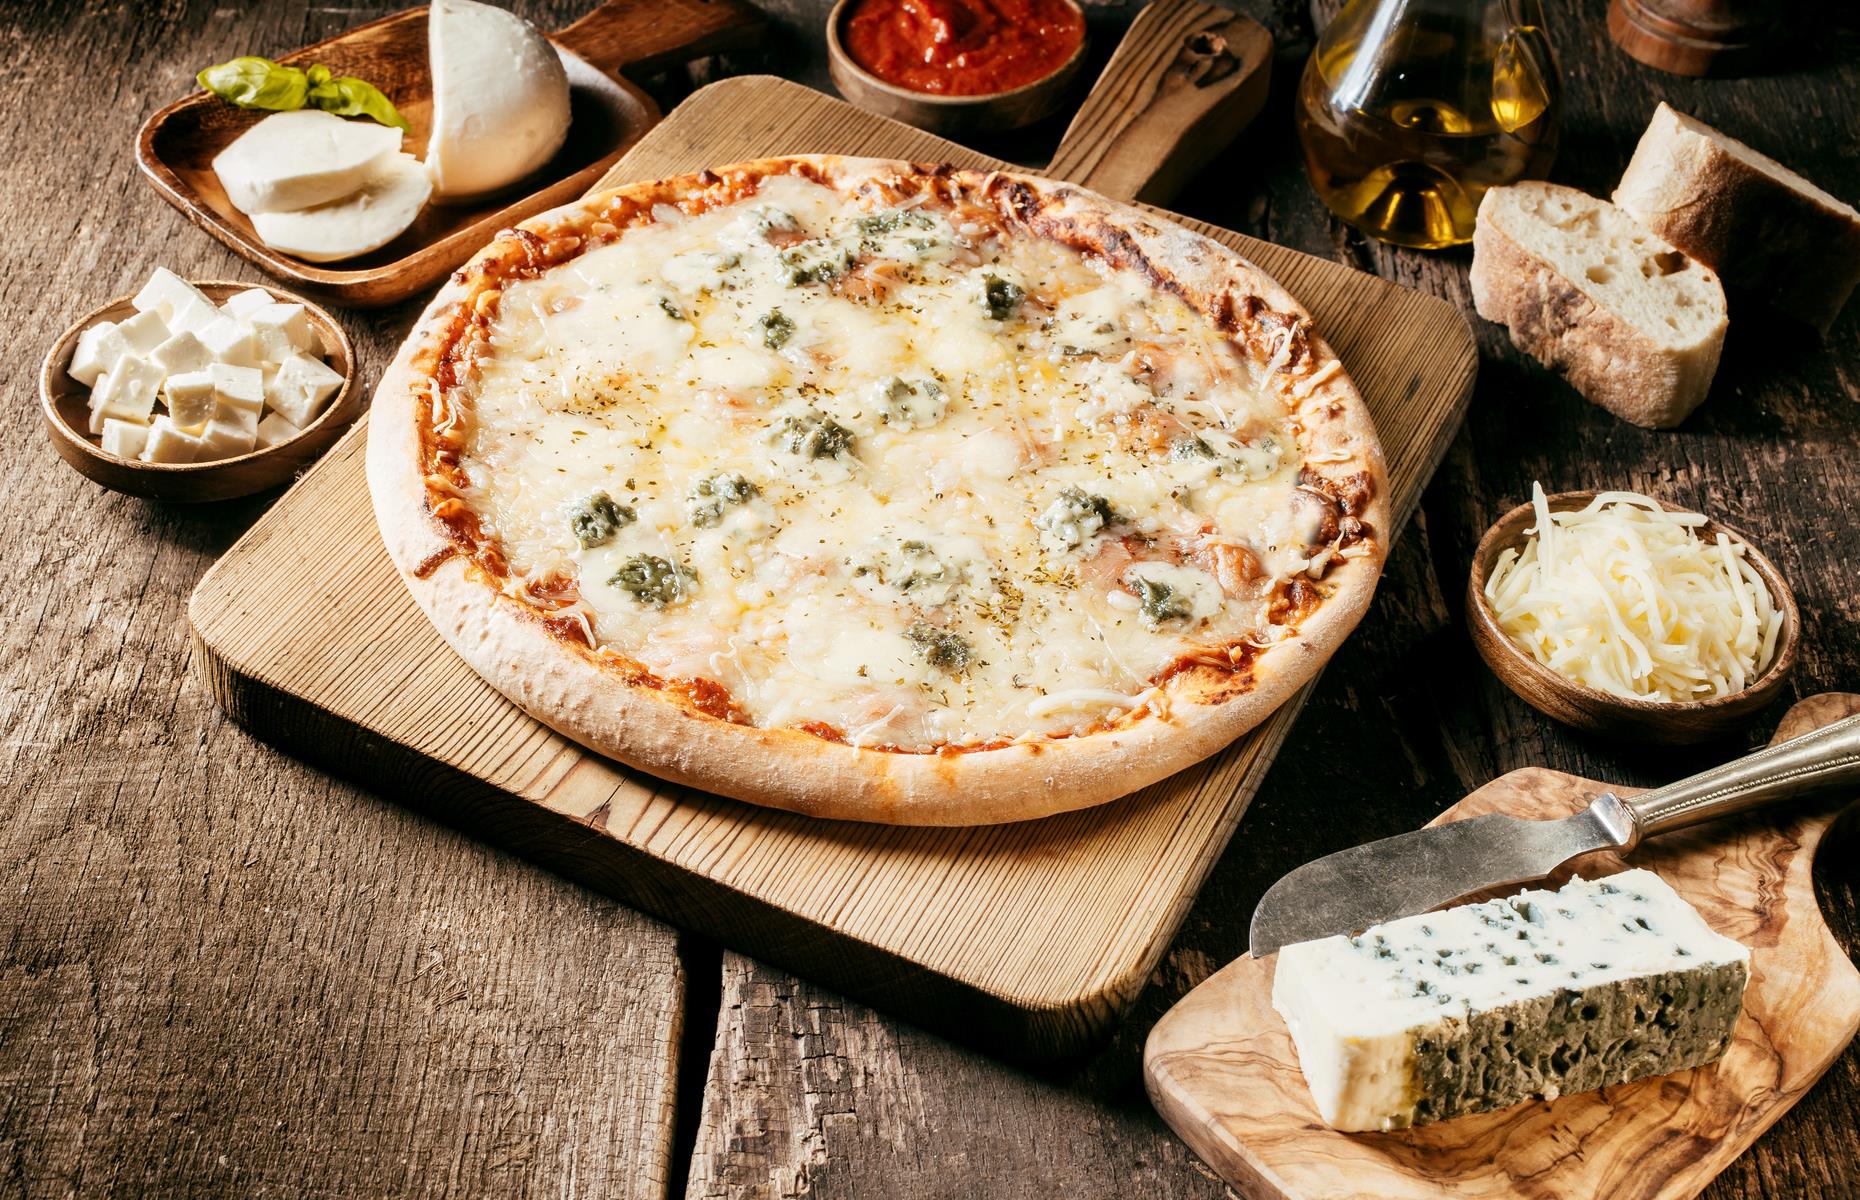 Quattro formaggi, four cheese pizza, is always a big hit. But which cheeses should you use? The Italians often combine mozzarella, Gorgonzola, Parmesan and fontina, which is a very good melting cheese. You could substitute it with Emmental. The blue cheese must be soft and creamy, with a good strong flavor.